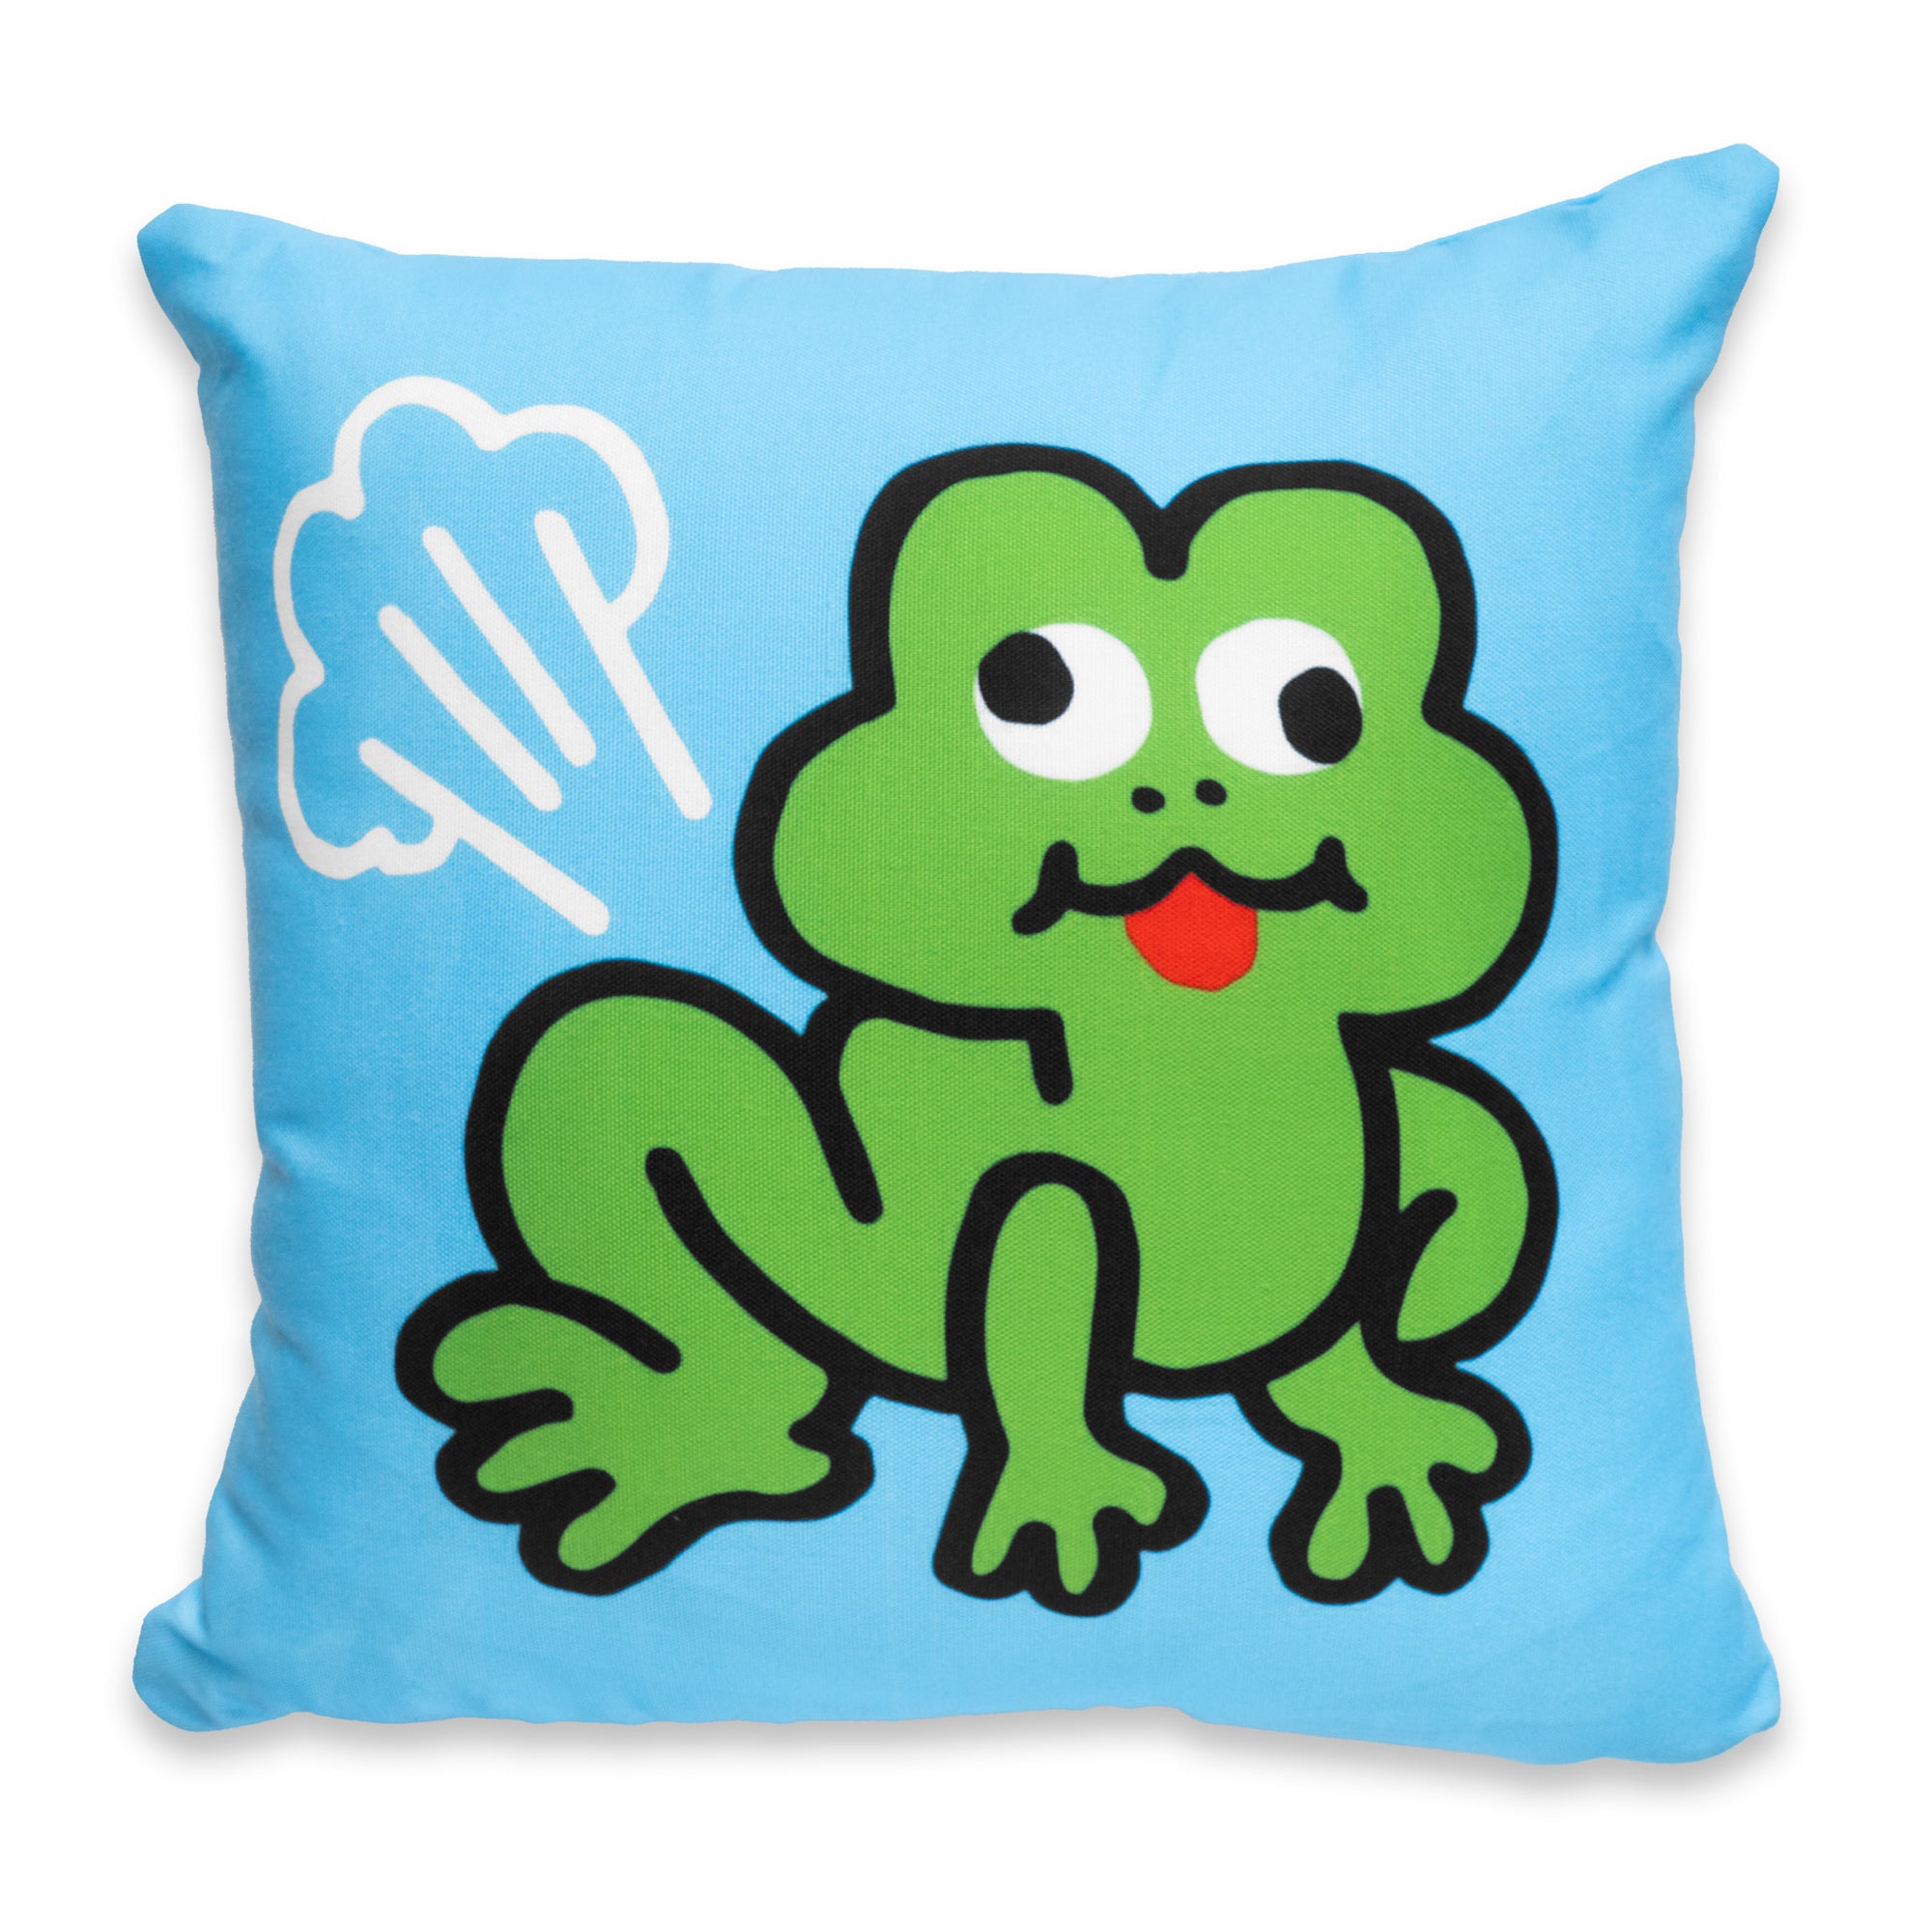 Frog Pillow by No Fun®.  Pillow is blue, with a green cartoon frog.  The frog has a fart cloud coming out of its butt.  The frogs has a silly expression on its face and its tongue is out.